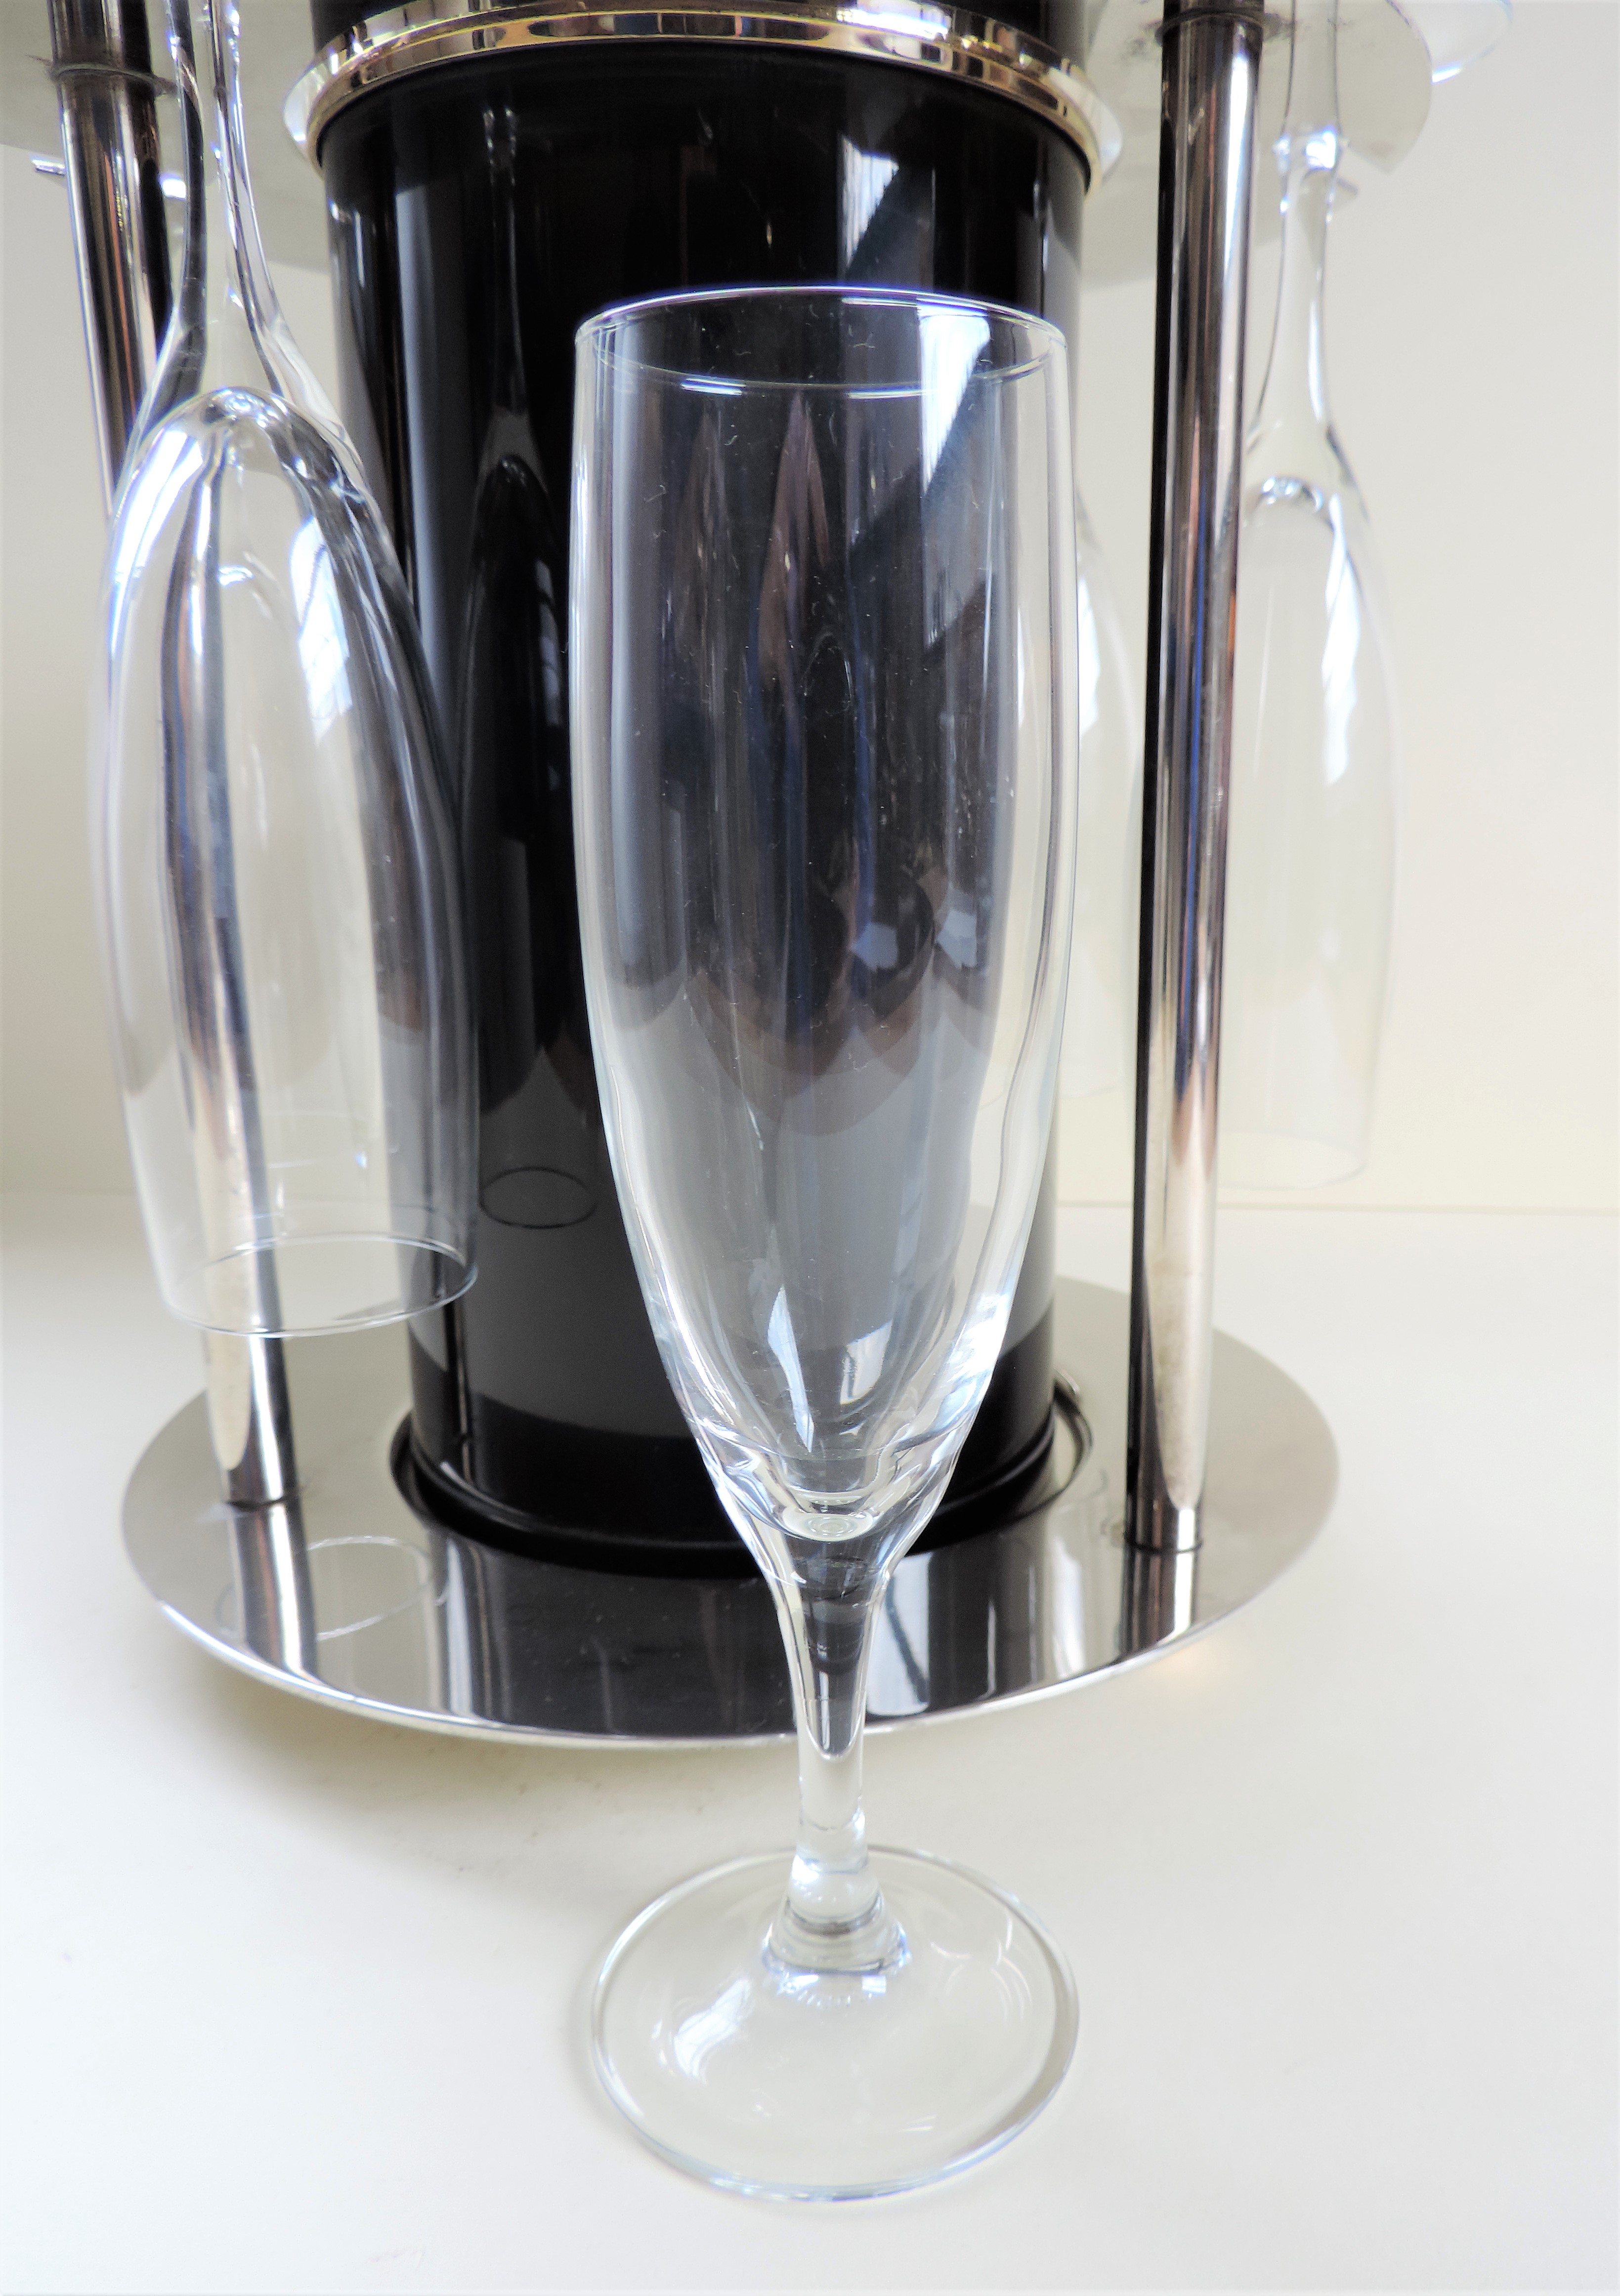 Novelty French Modernist Champagne Cooler, circa 1970's - Image 5 of 11